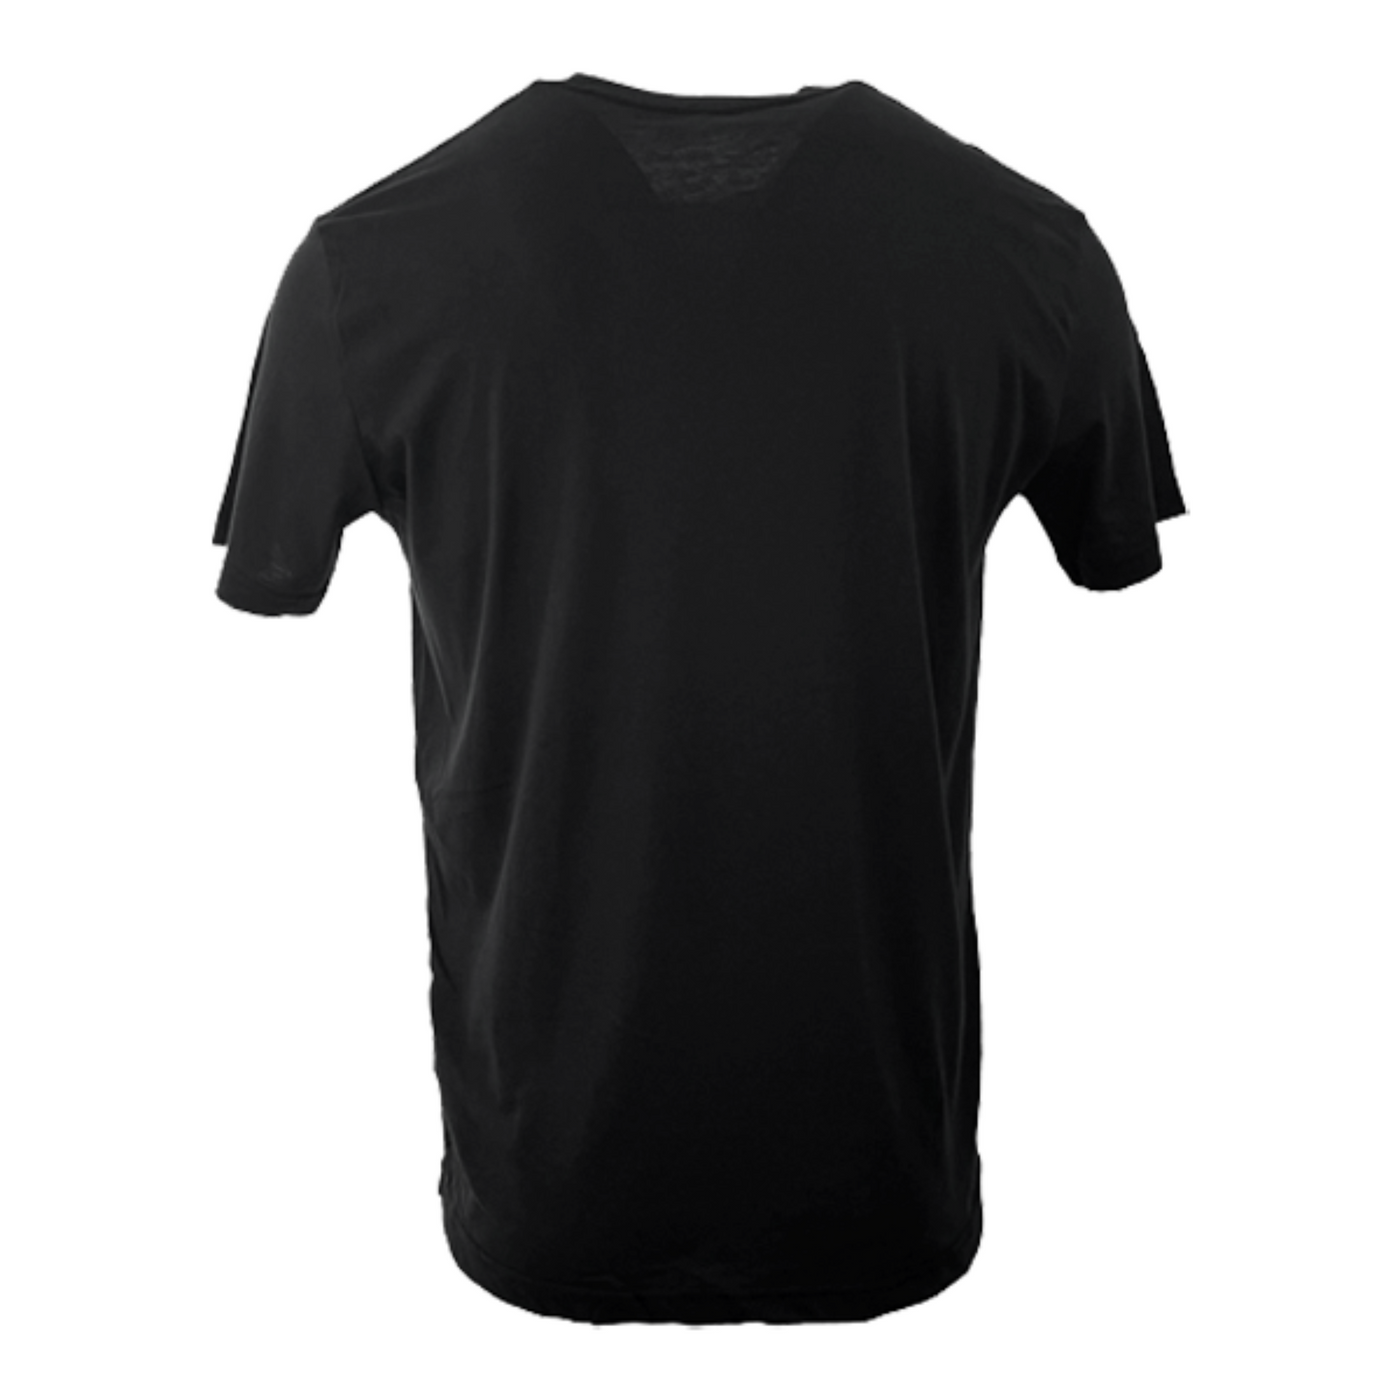 Musicians First Apparel Co. Solid Black T-Shirt